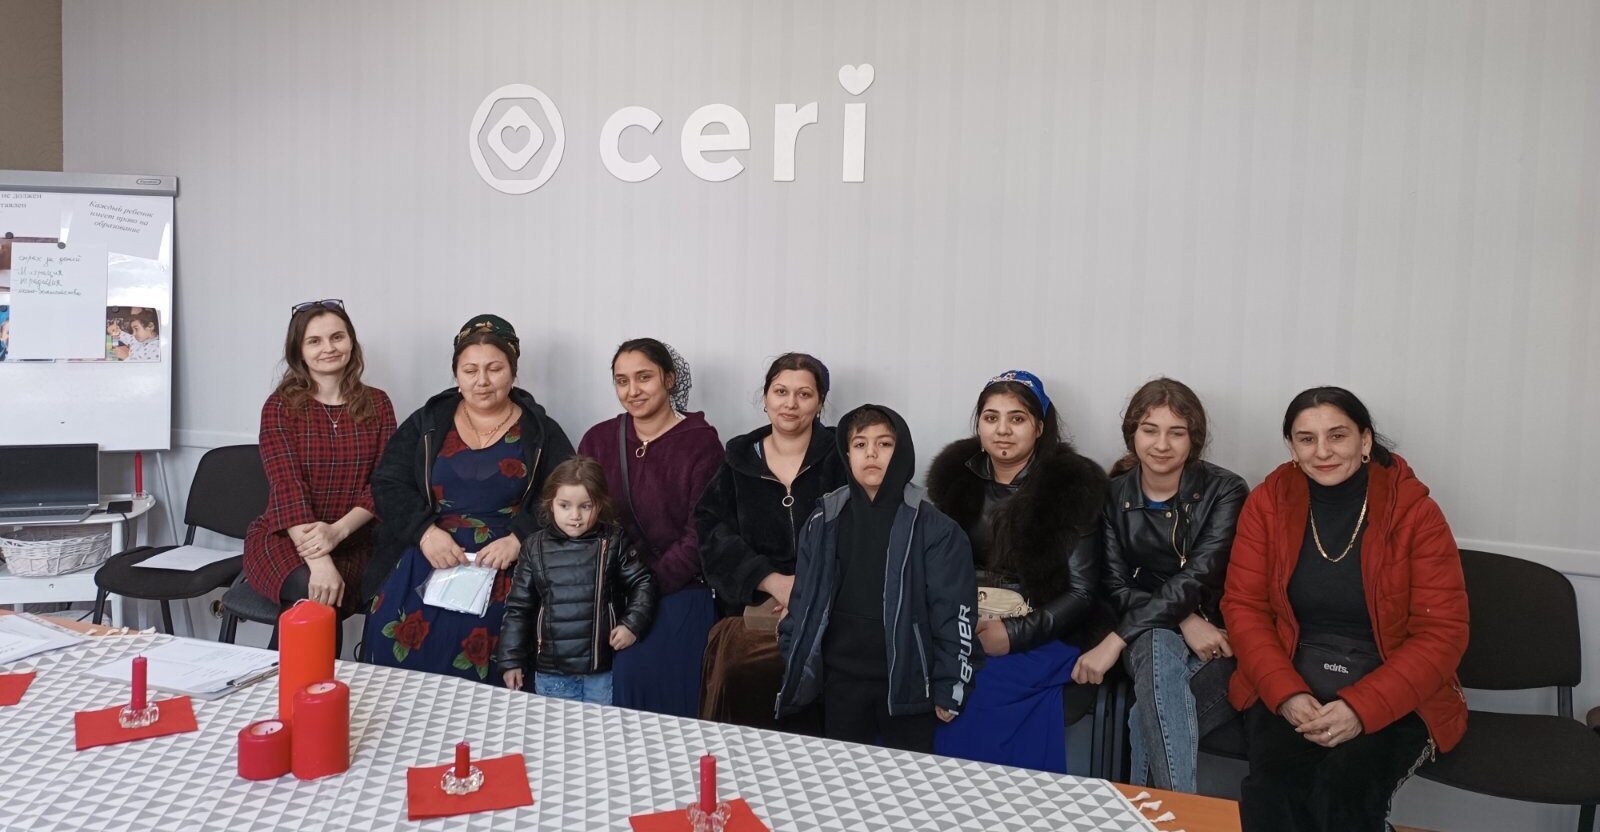 Roma refugees from Ukraine gather at the CERI office in Moldova for support